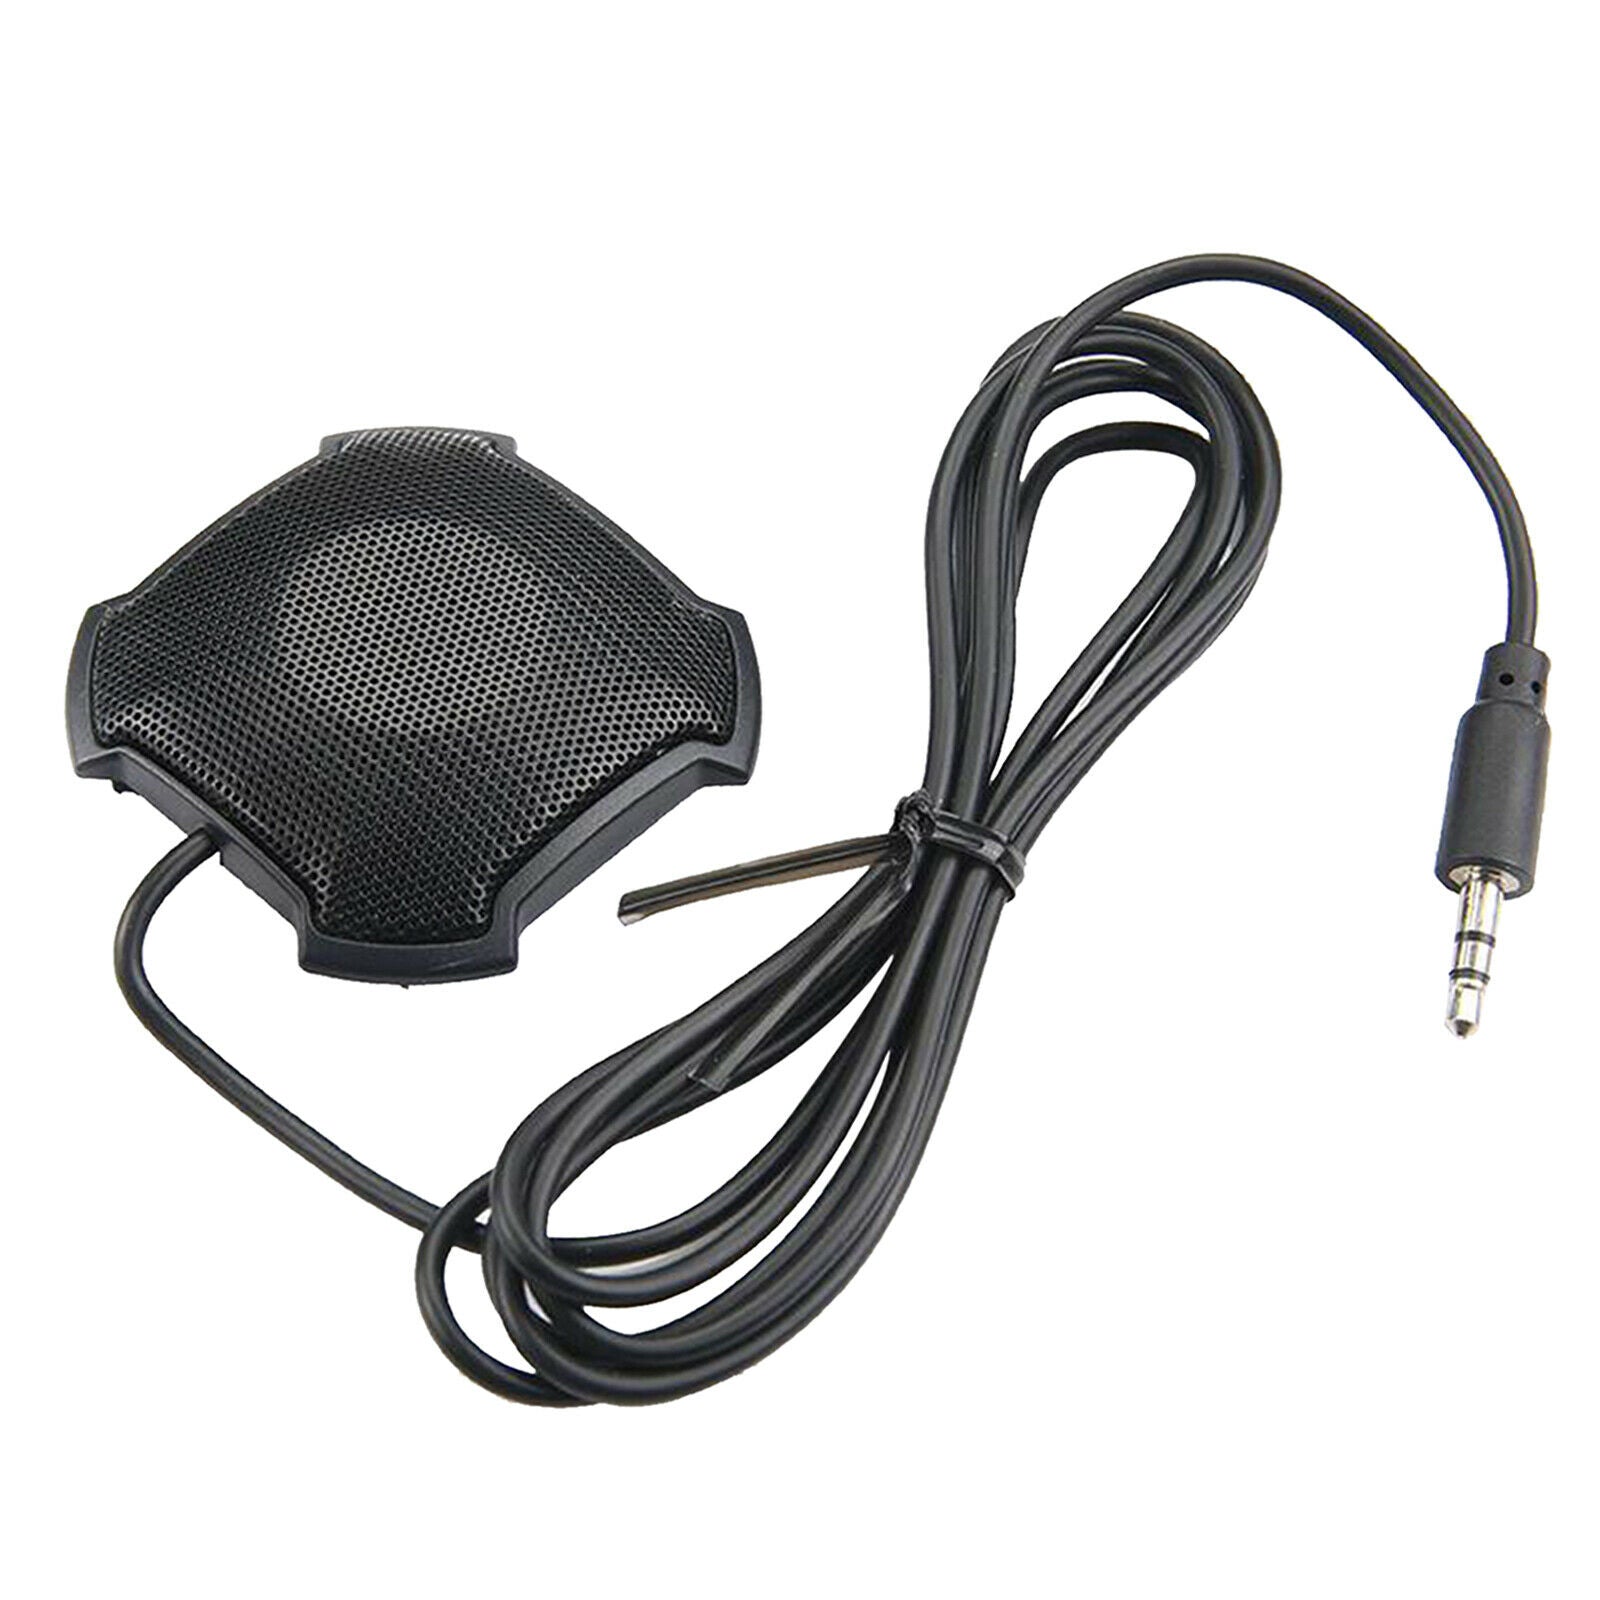 Omnidirectional Condenser Microphone 3.5mm Plug Desktop Surface Mounted for